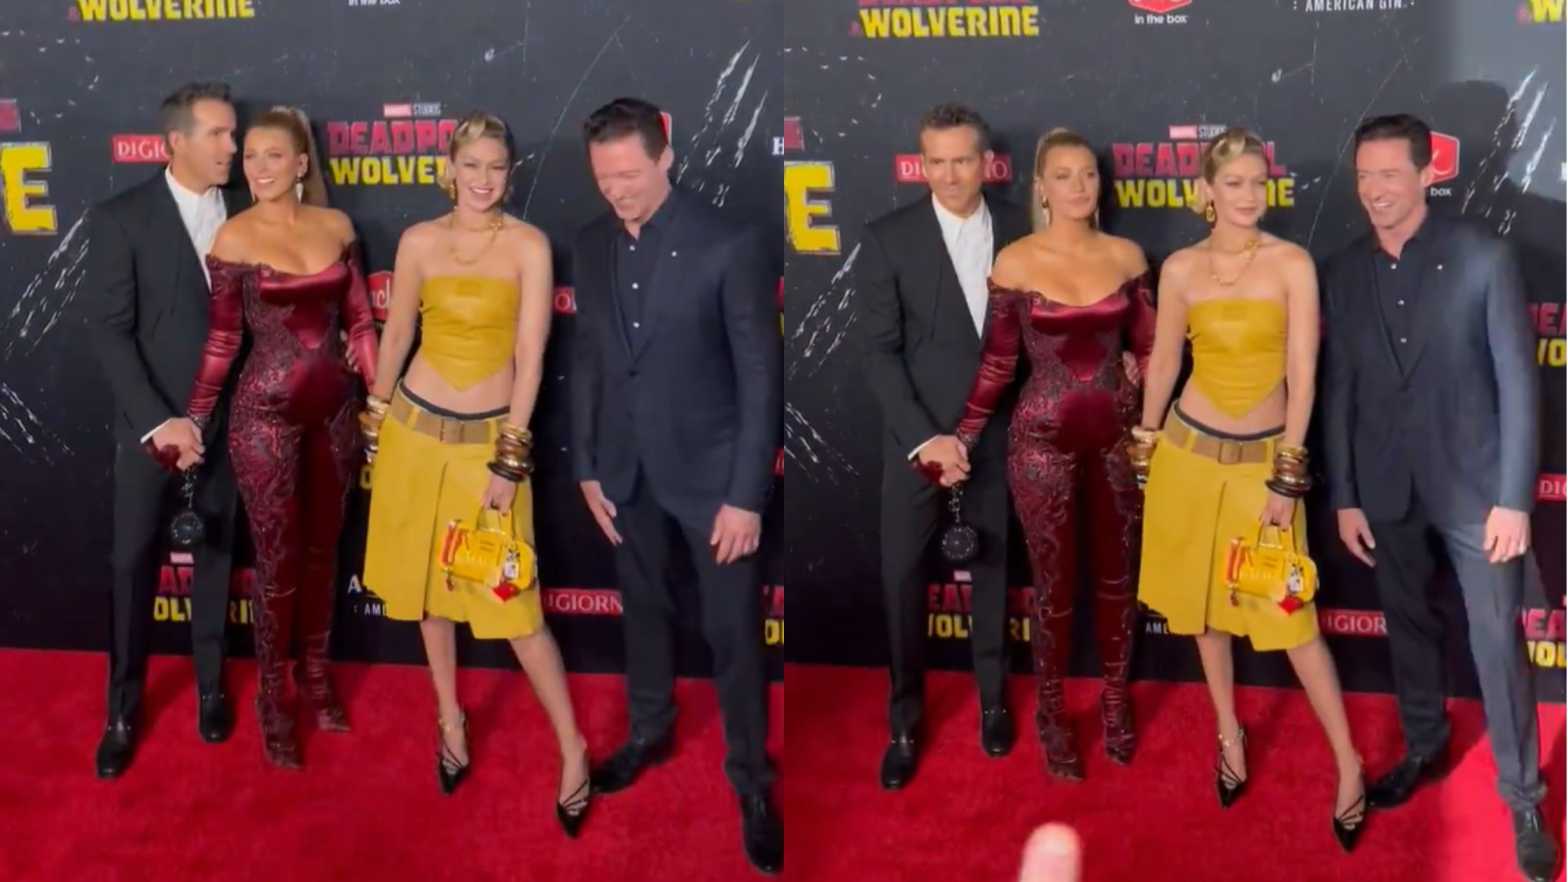 Blake Lively and Gigi Hadid Steal the Show at “Deadpool & Wolverine” Premiere in New York